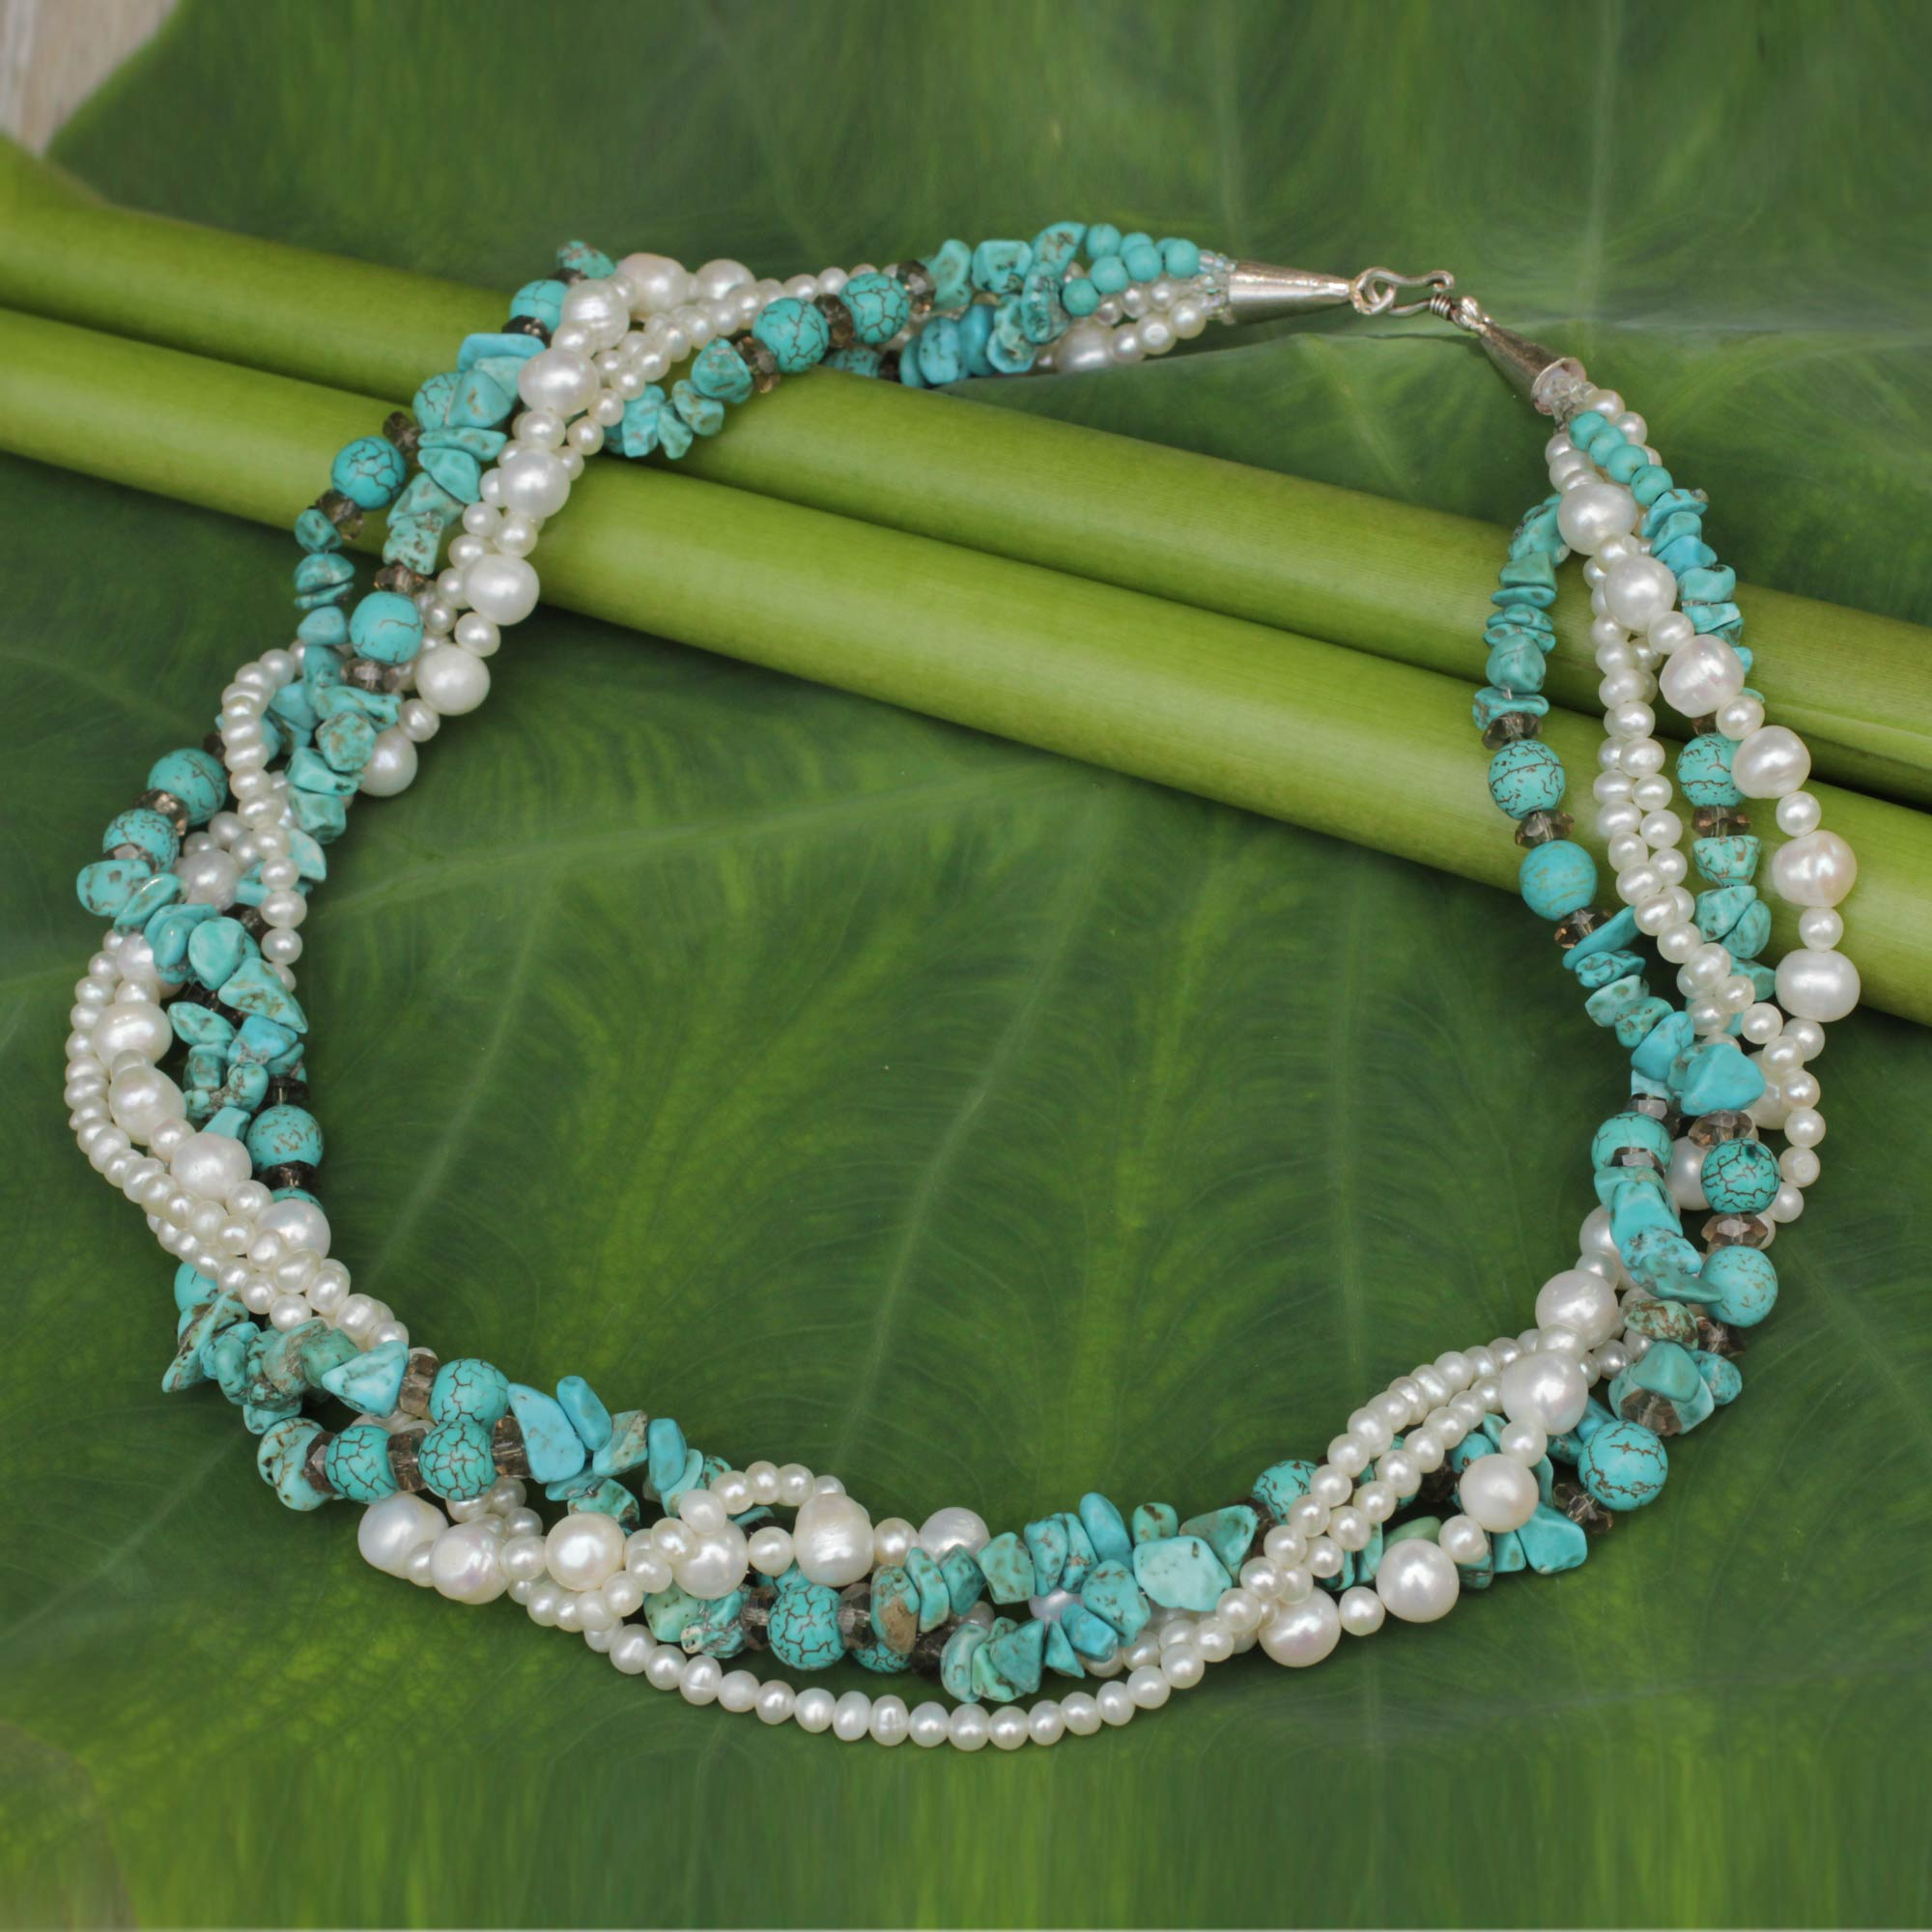 UNICEF Market | Fair Trade Torsade Necklace with Pearls and Calcite ...